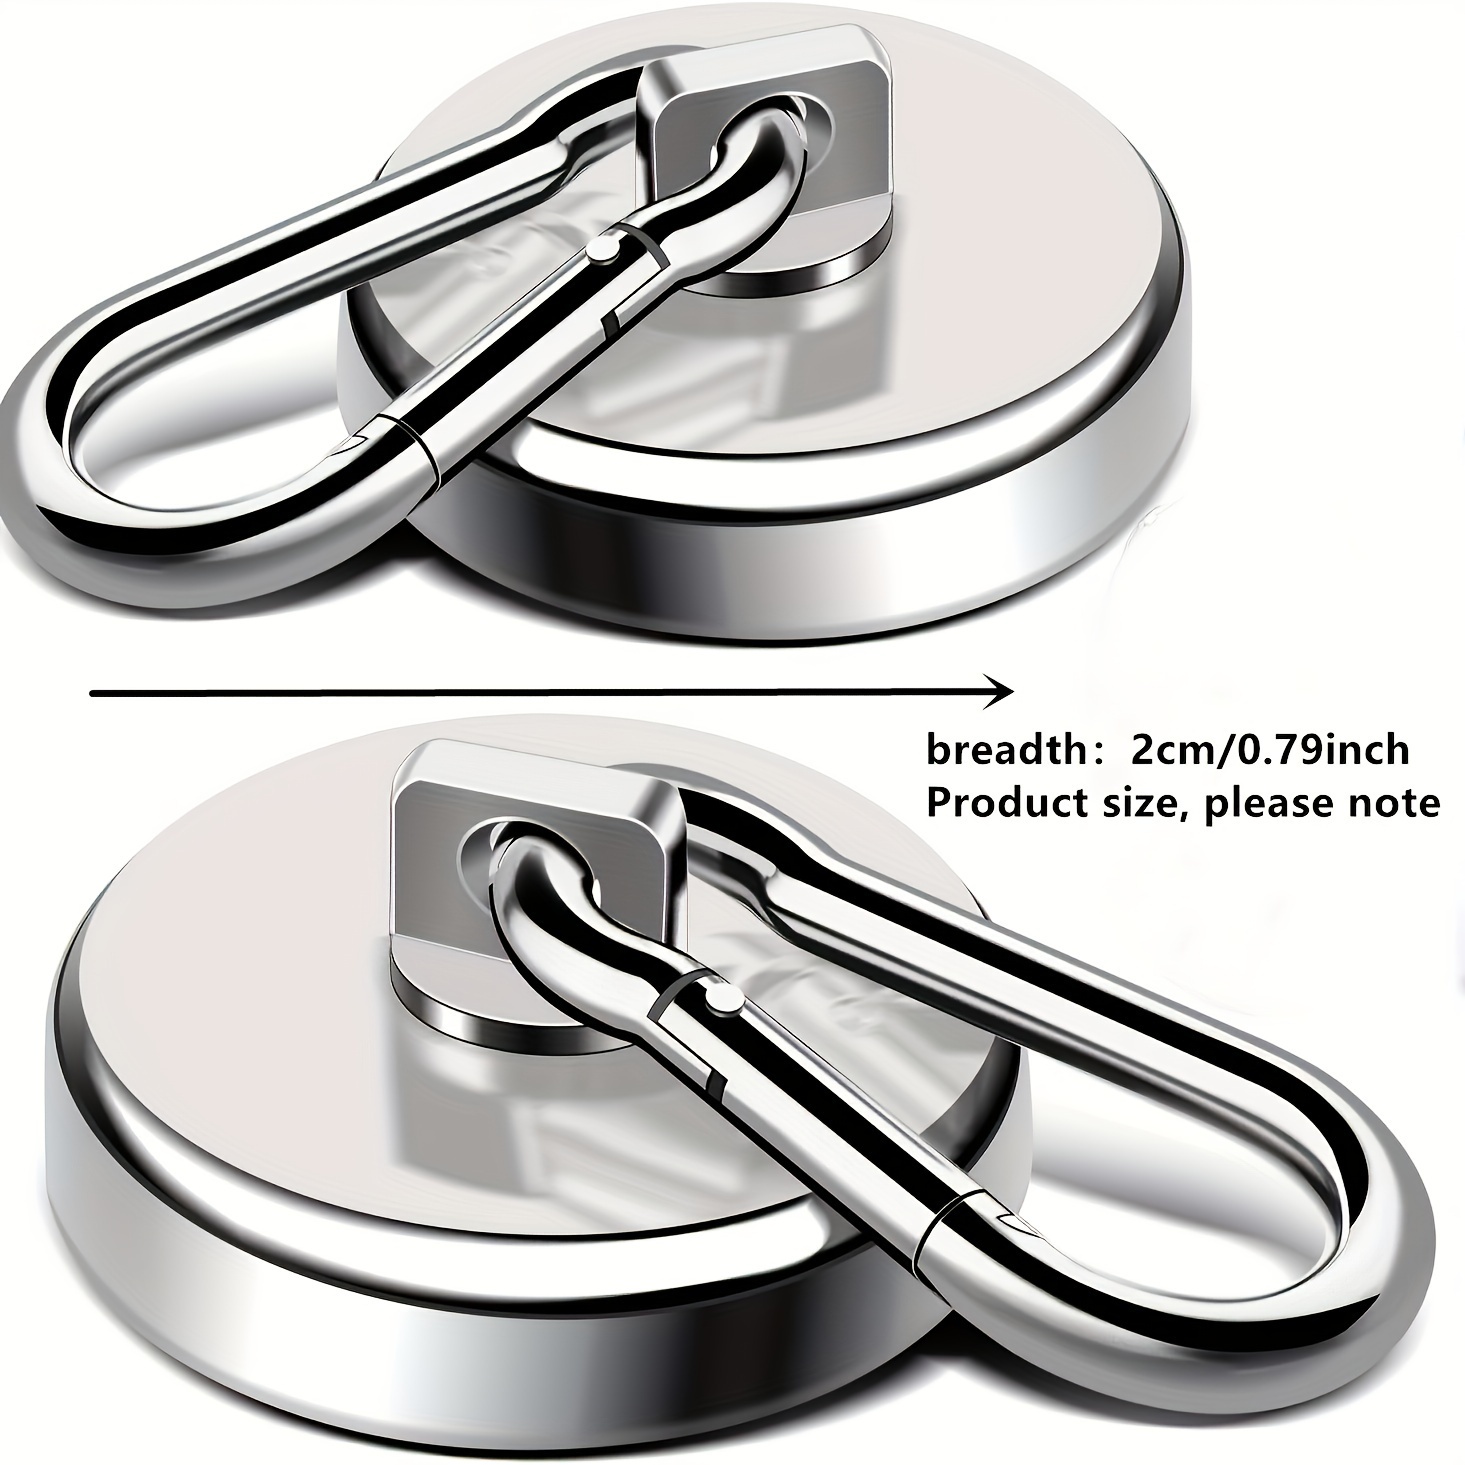 

2pcs Magnetic Hooks Heavy Duty, 100lbs Strong Magnetic Hooks Neodymium Magnets With Carabiner, Magnet Hooks With Swivel For Bbq, Hanging, Cruise, Kitchen, Garage, Refrigerator